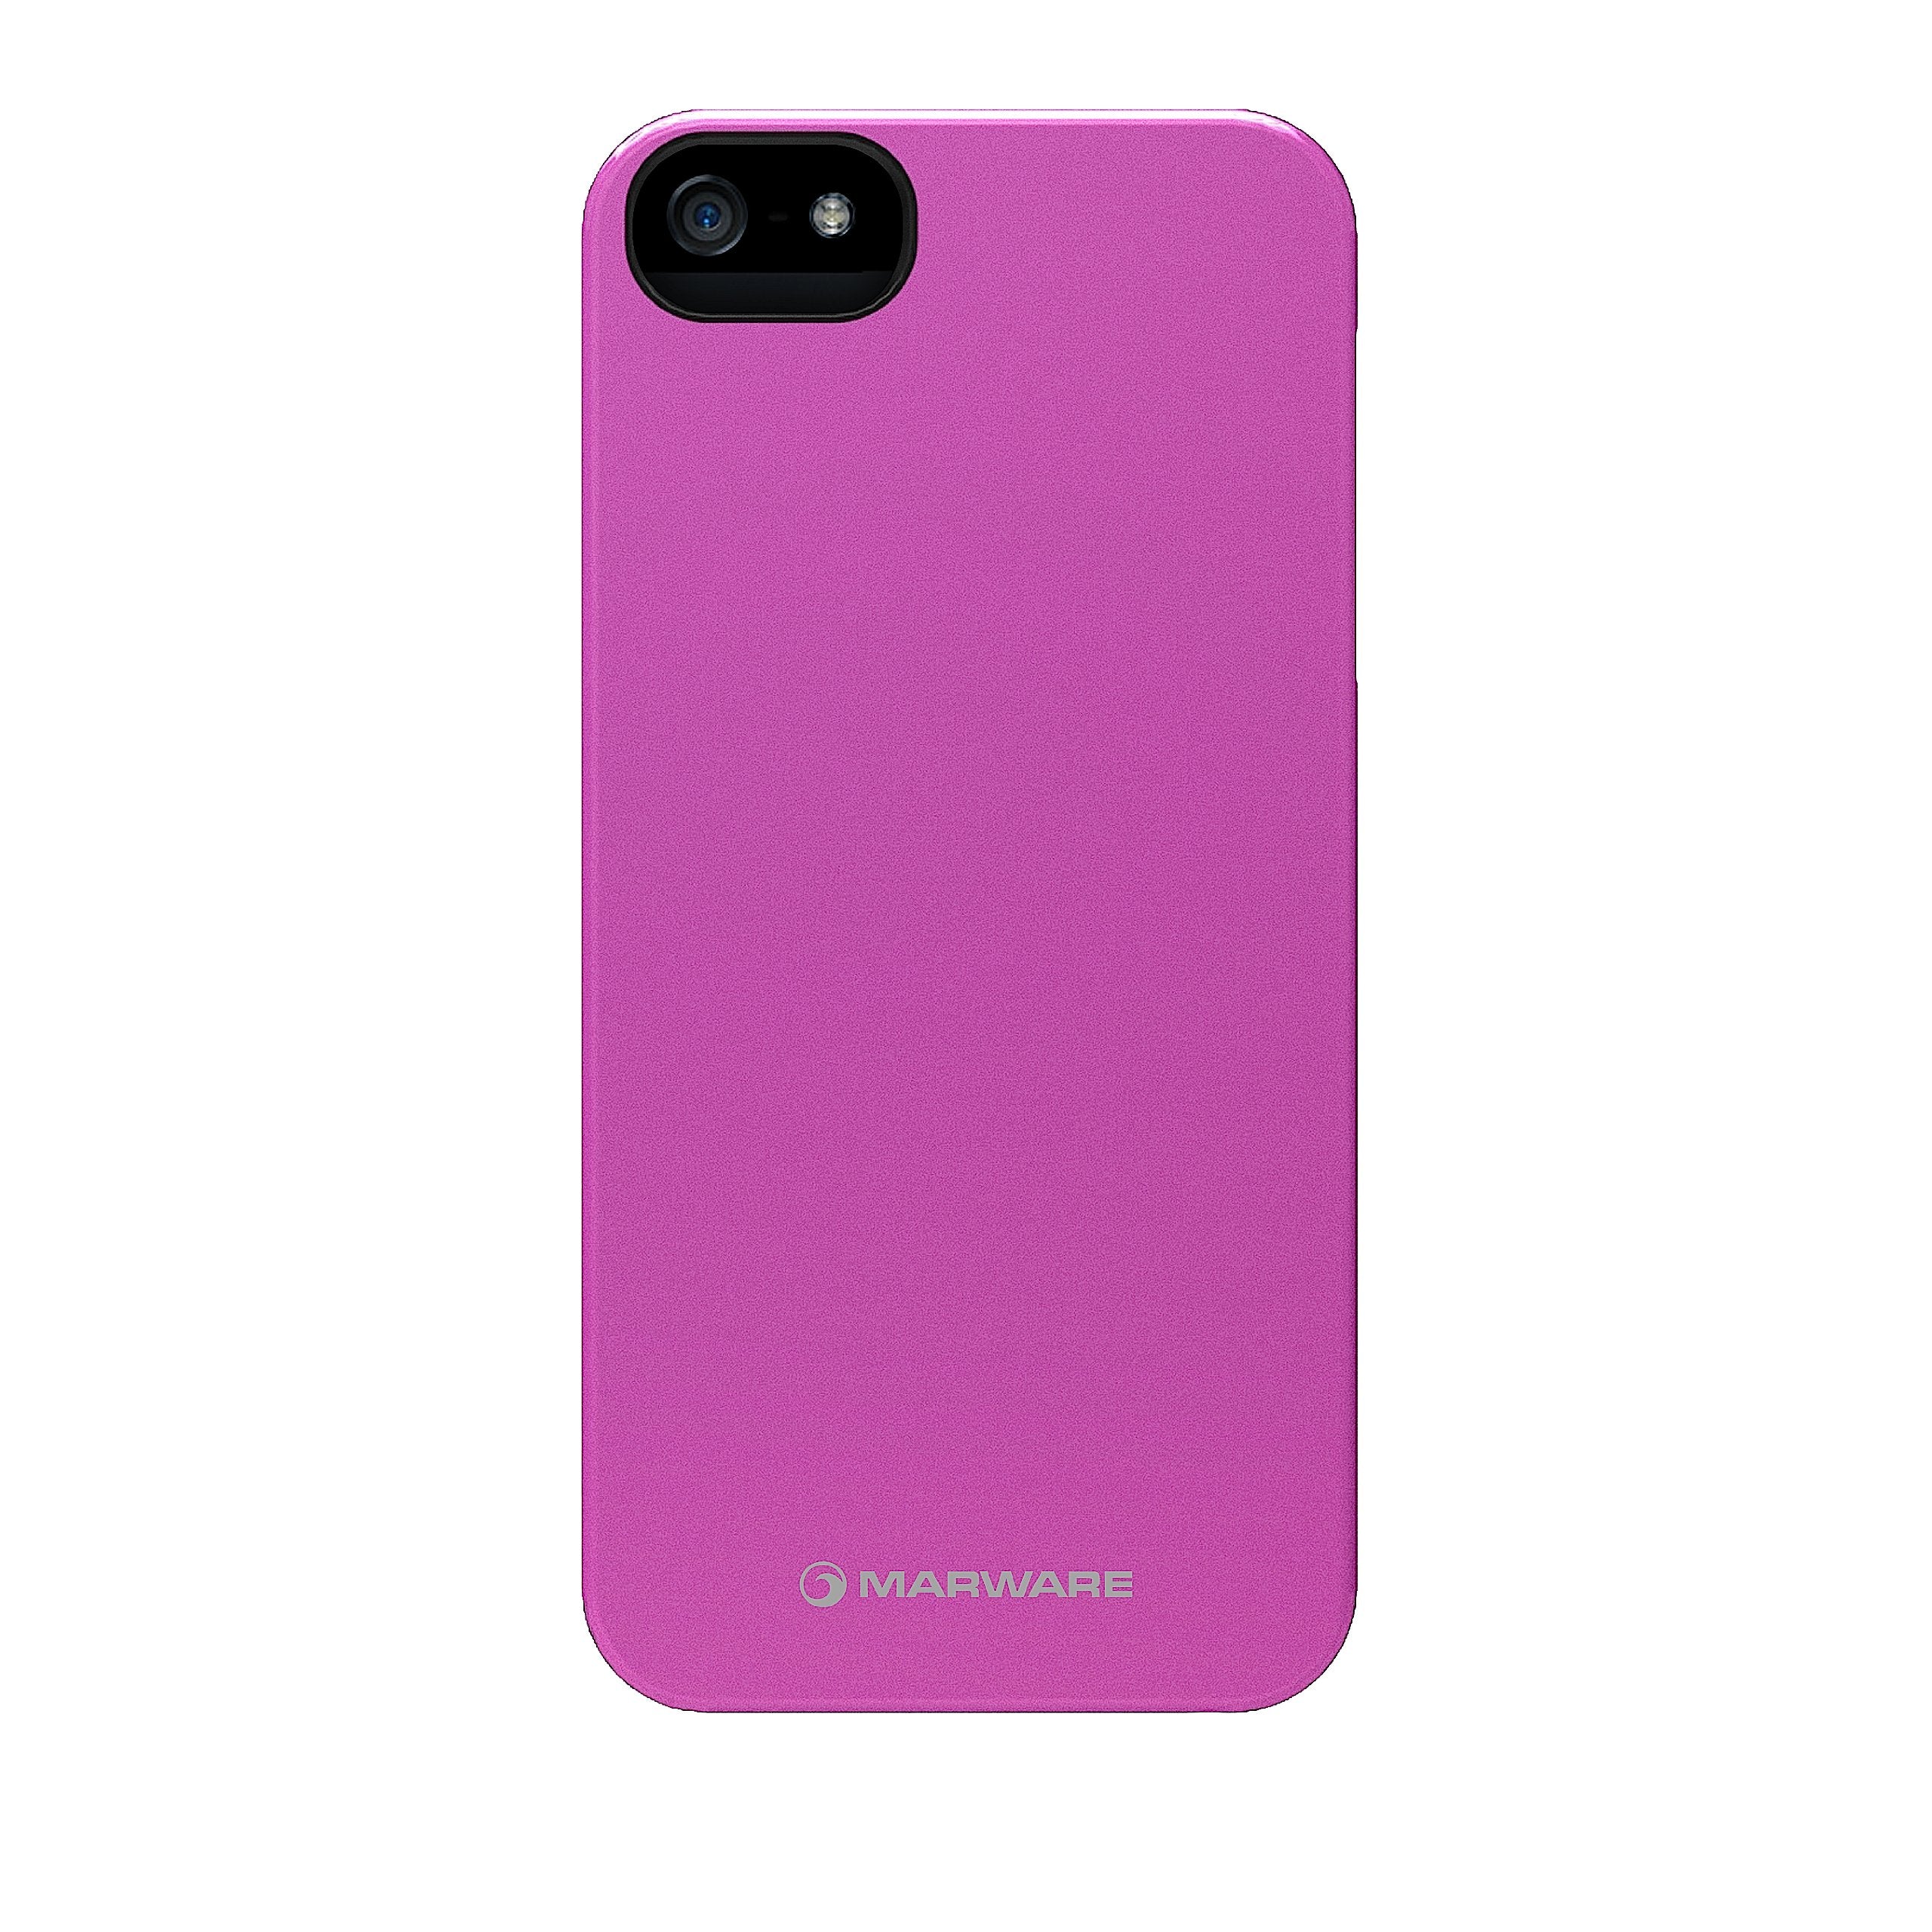 Marware ADMS1014 Microshell Case for iPhone 5 - 1 Pack - Retail Packaging - Pink